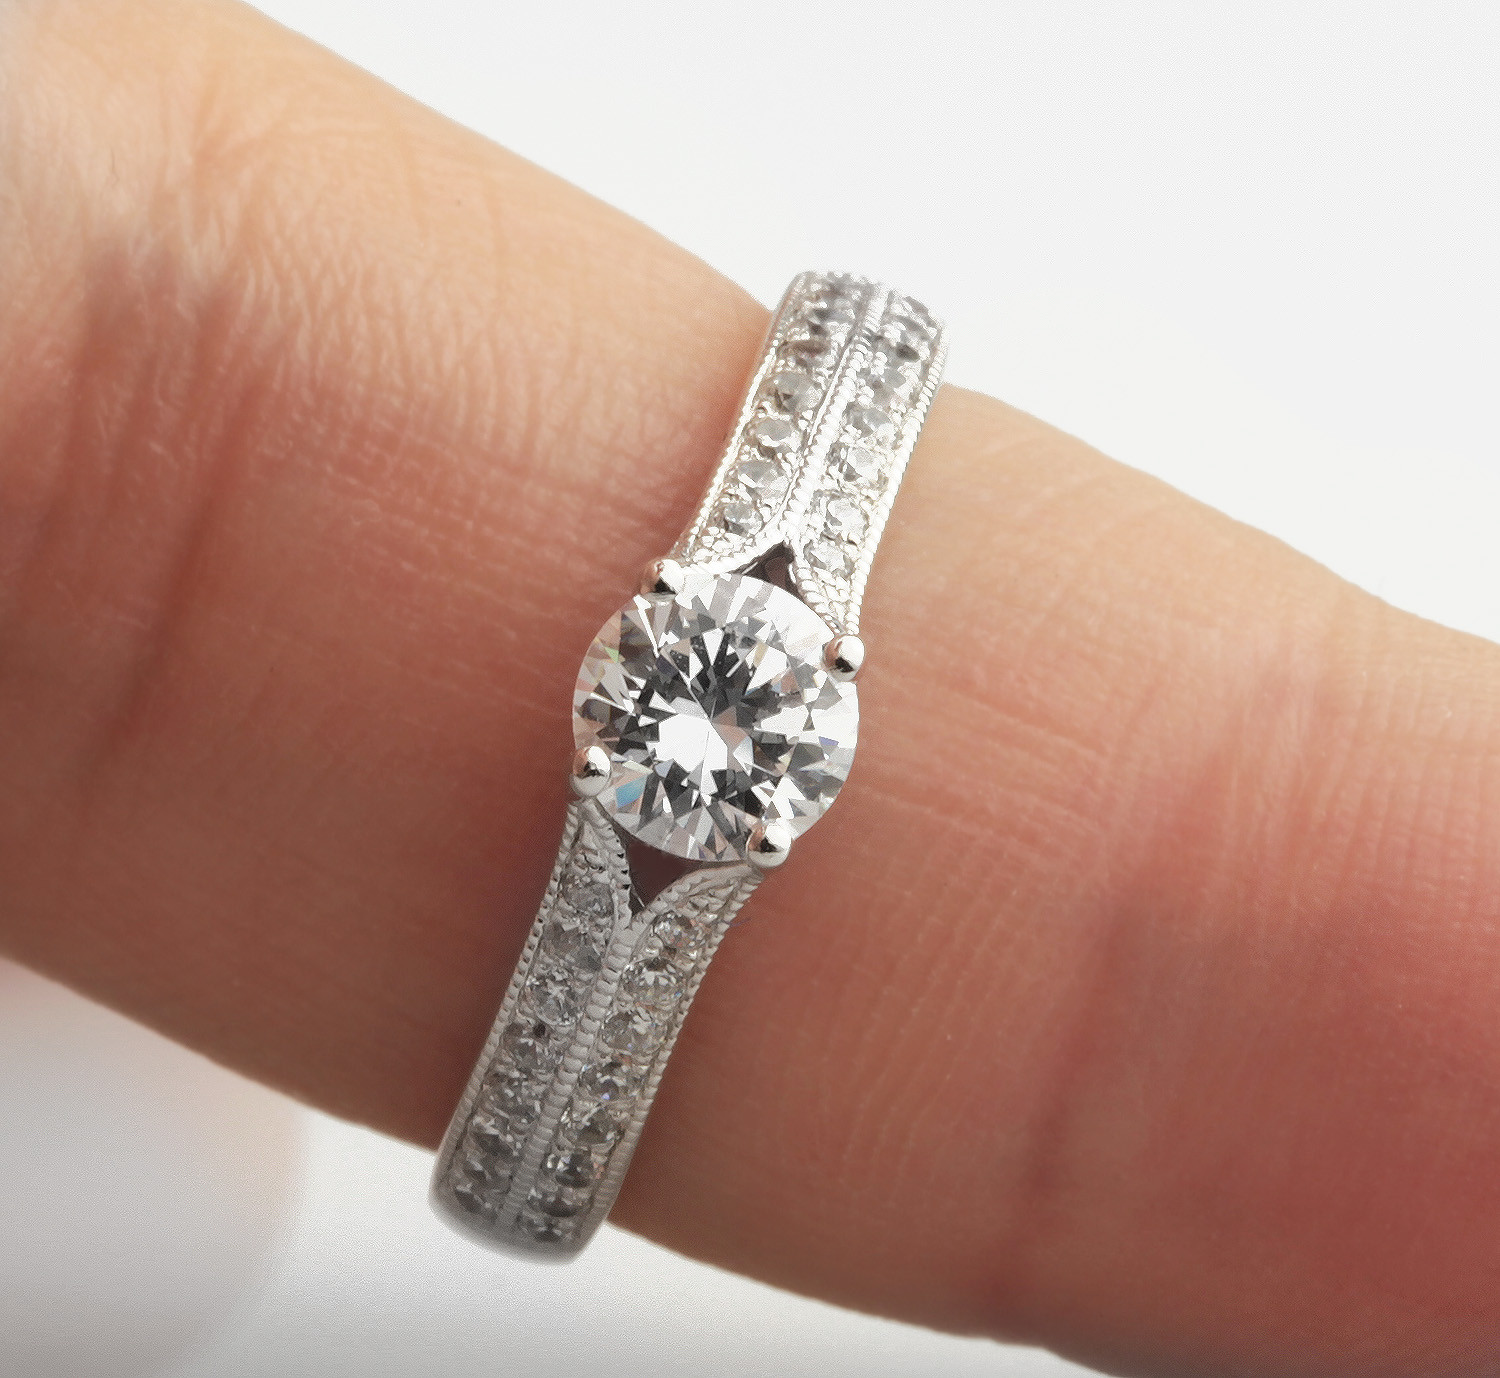 How Much Should A Wedding Ring Cost
 The Average Price of an Engagement Ring How Much Should